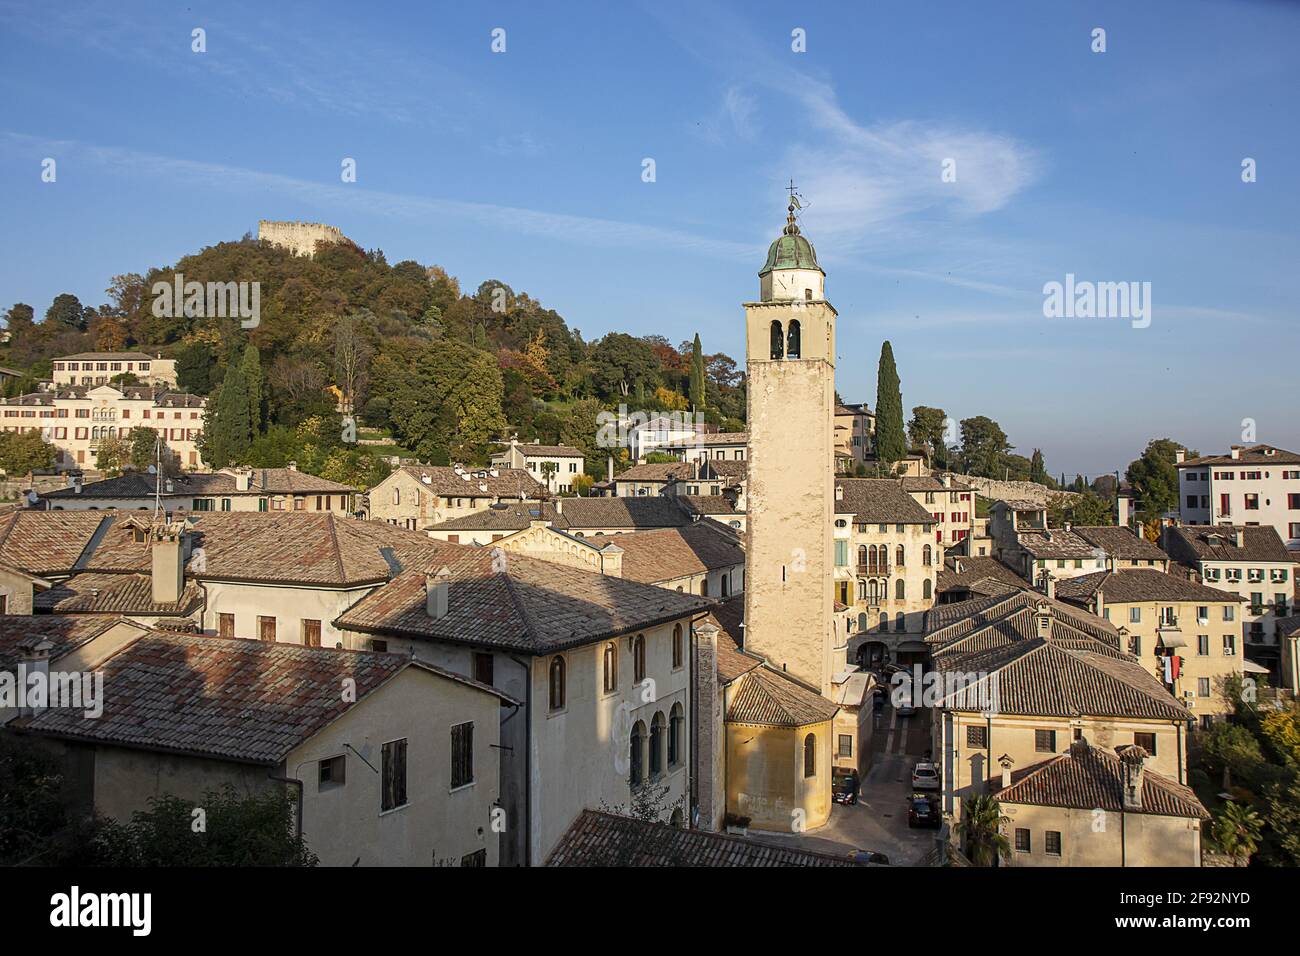 Panoramic view of the village of Asolo Stock Photo